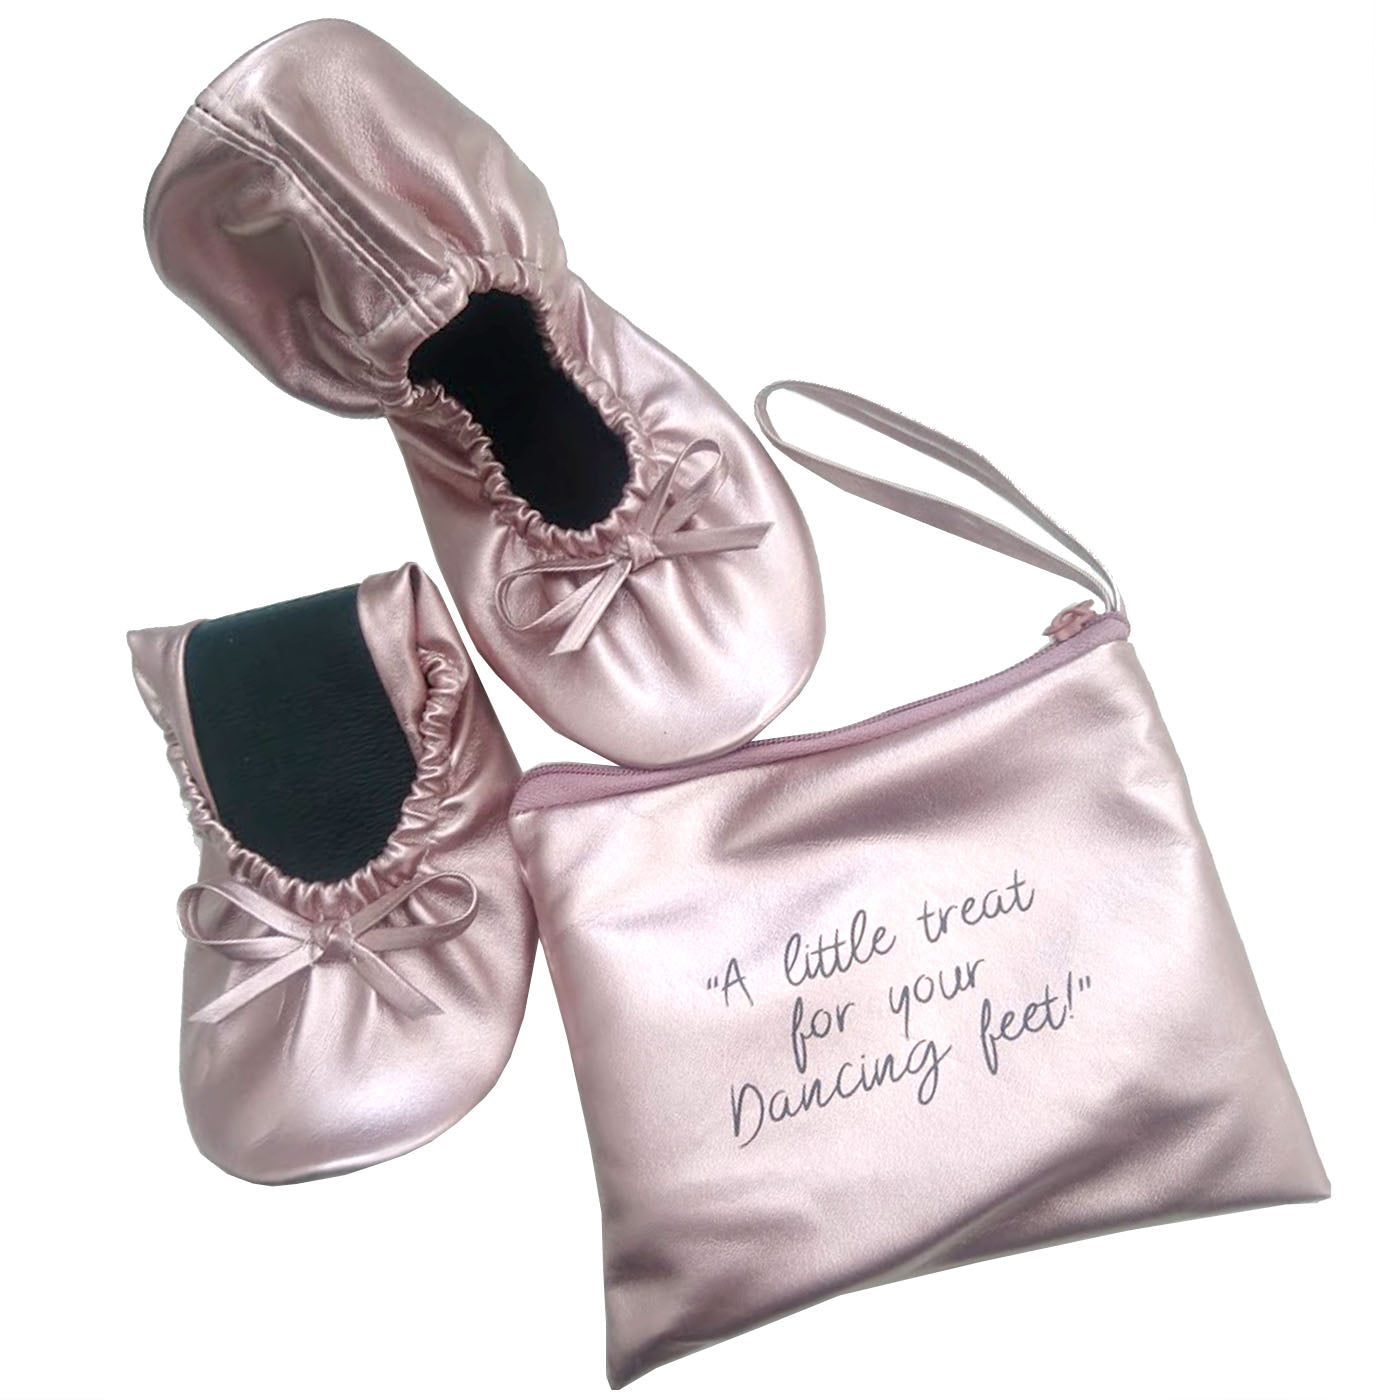 30 pairs of rose gold fold-up ballerinas in a personalized crate